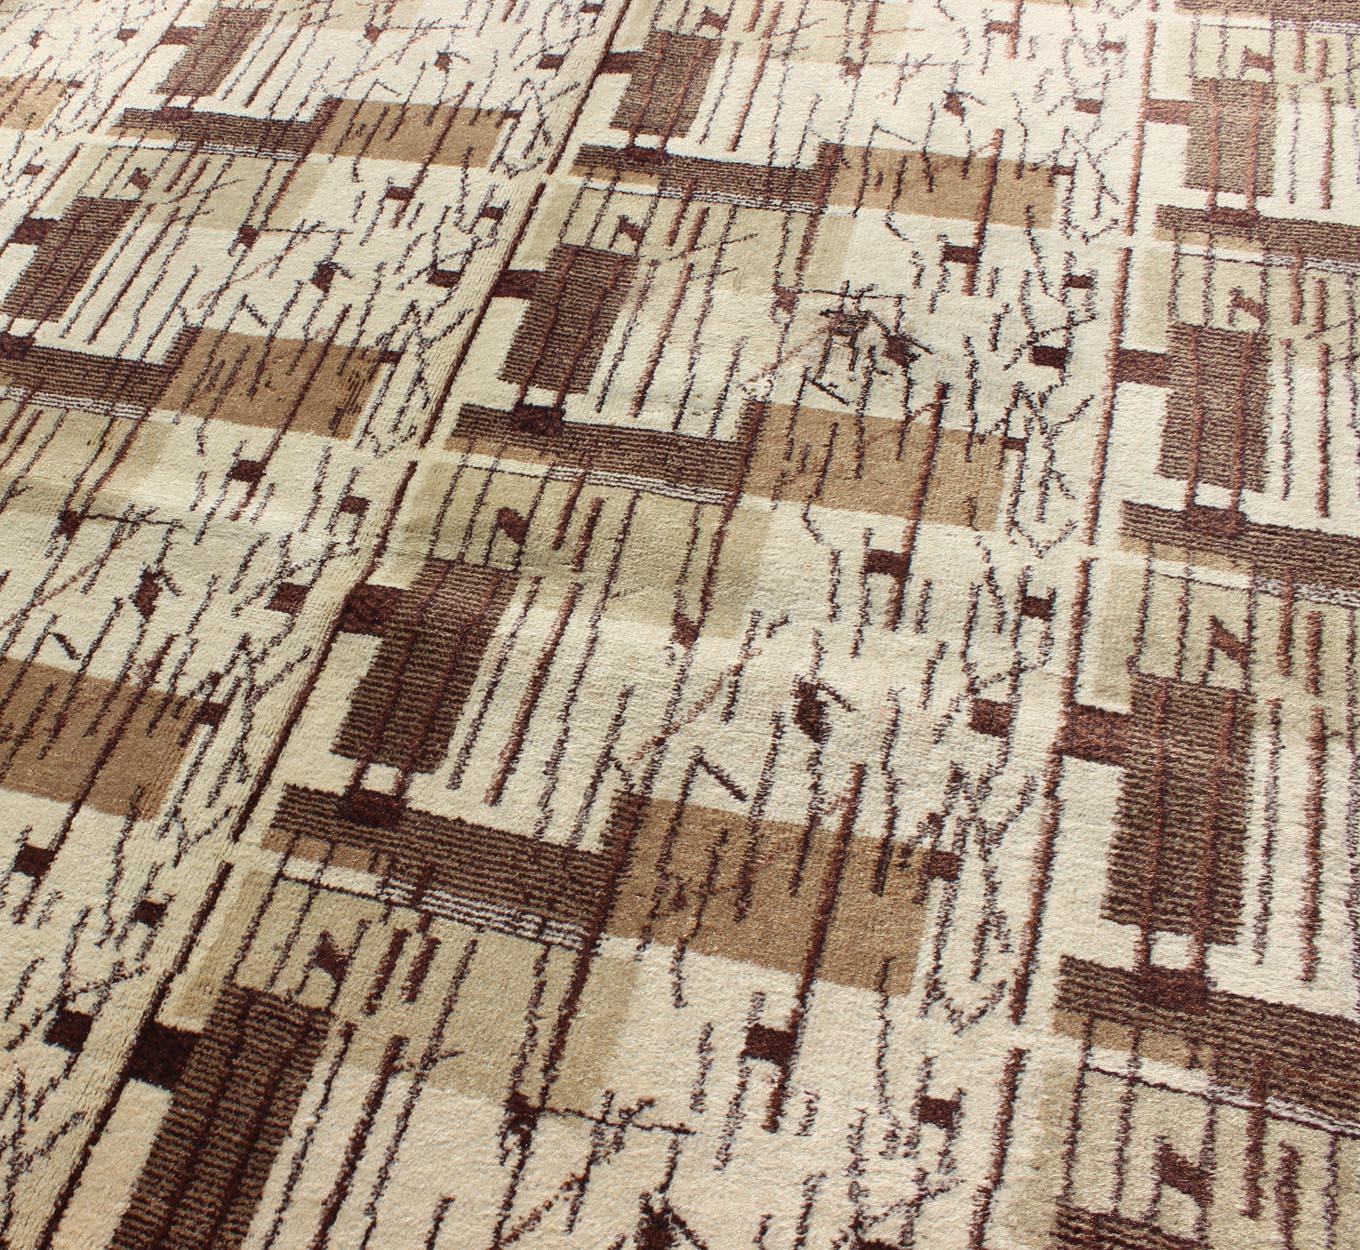 Mid-Century Modern Rug with Jagged Stripes and Blocks Design in Shades of Brown In Excellent Condition For Sale In Atlanta, GA